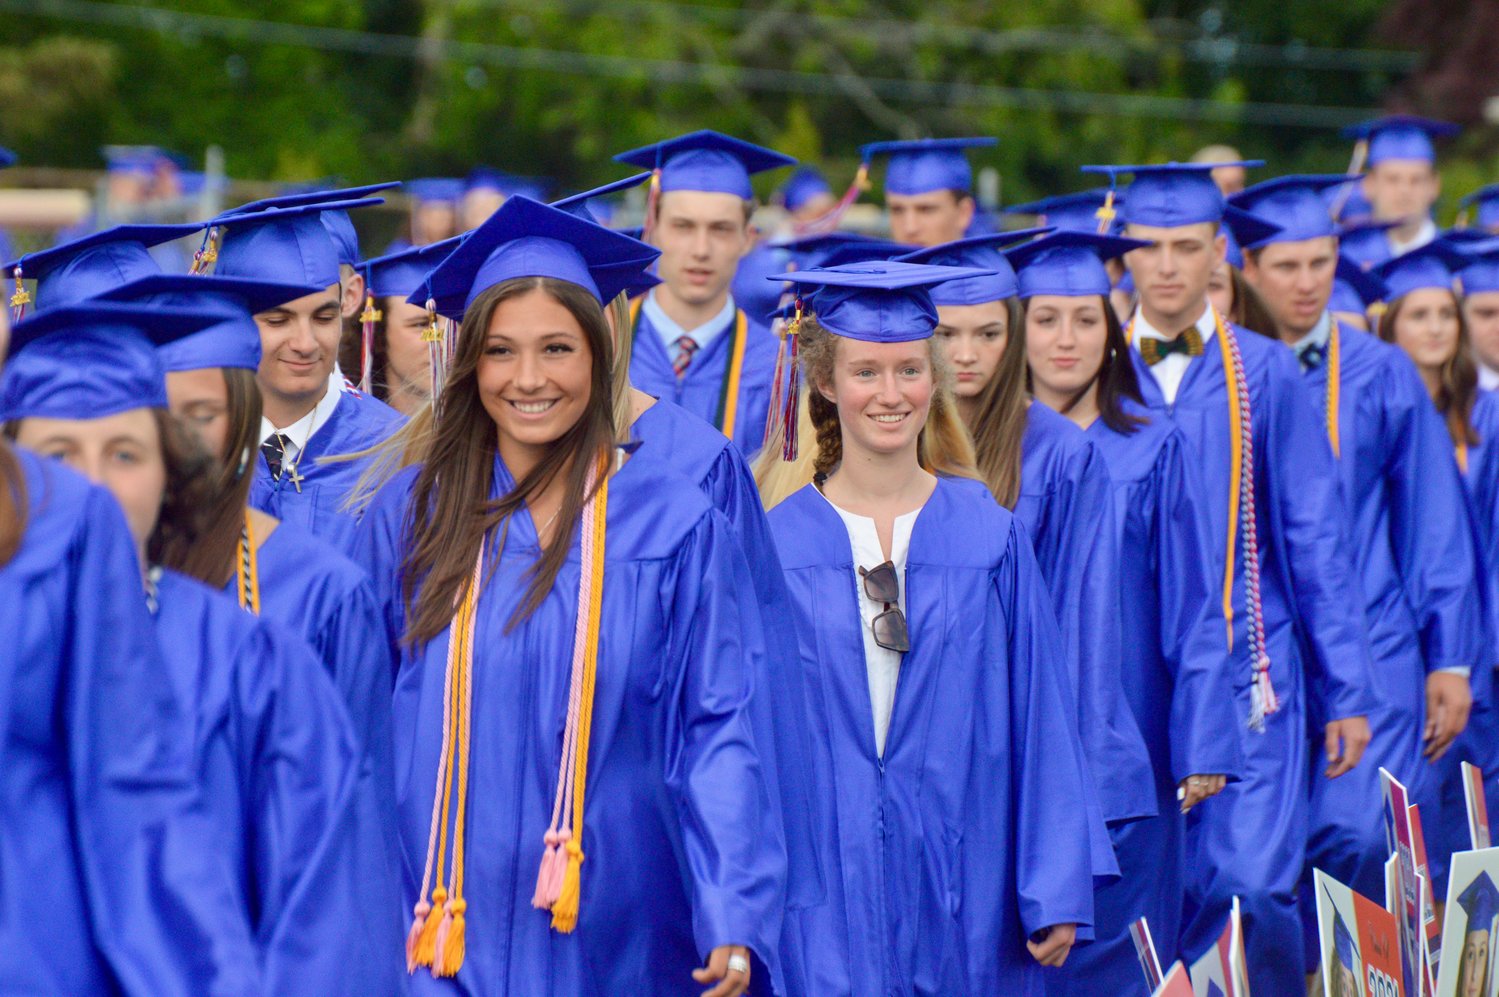 Members of the Class of 2021 march from the school to the baseball field, where graduation was held.